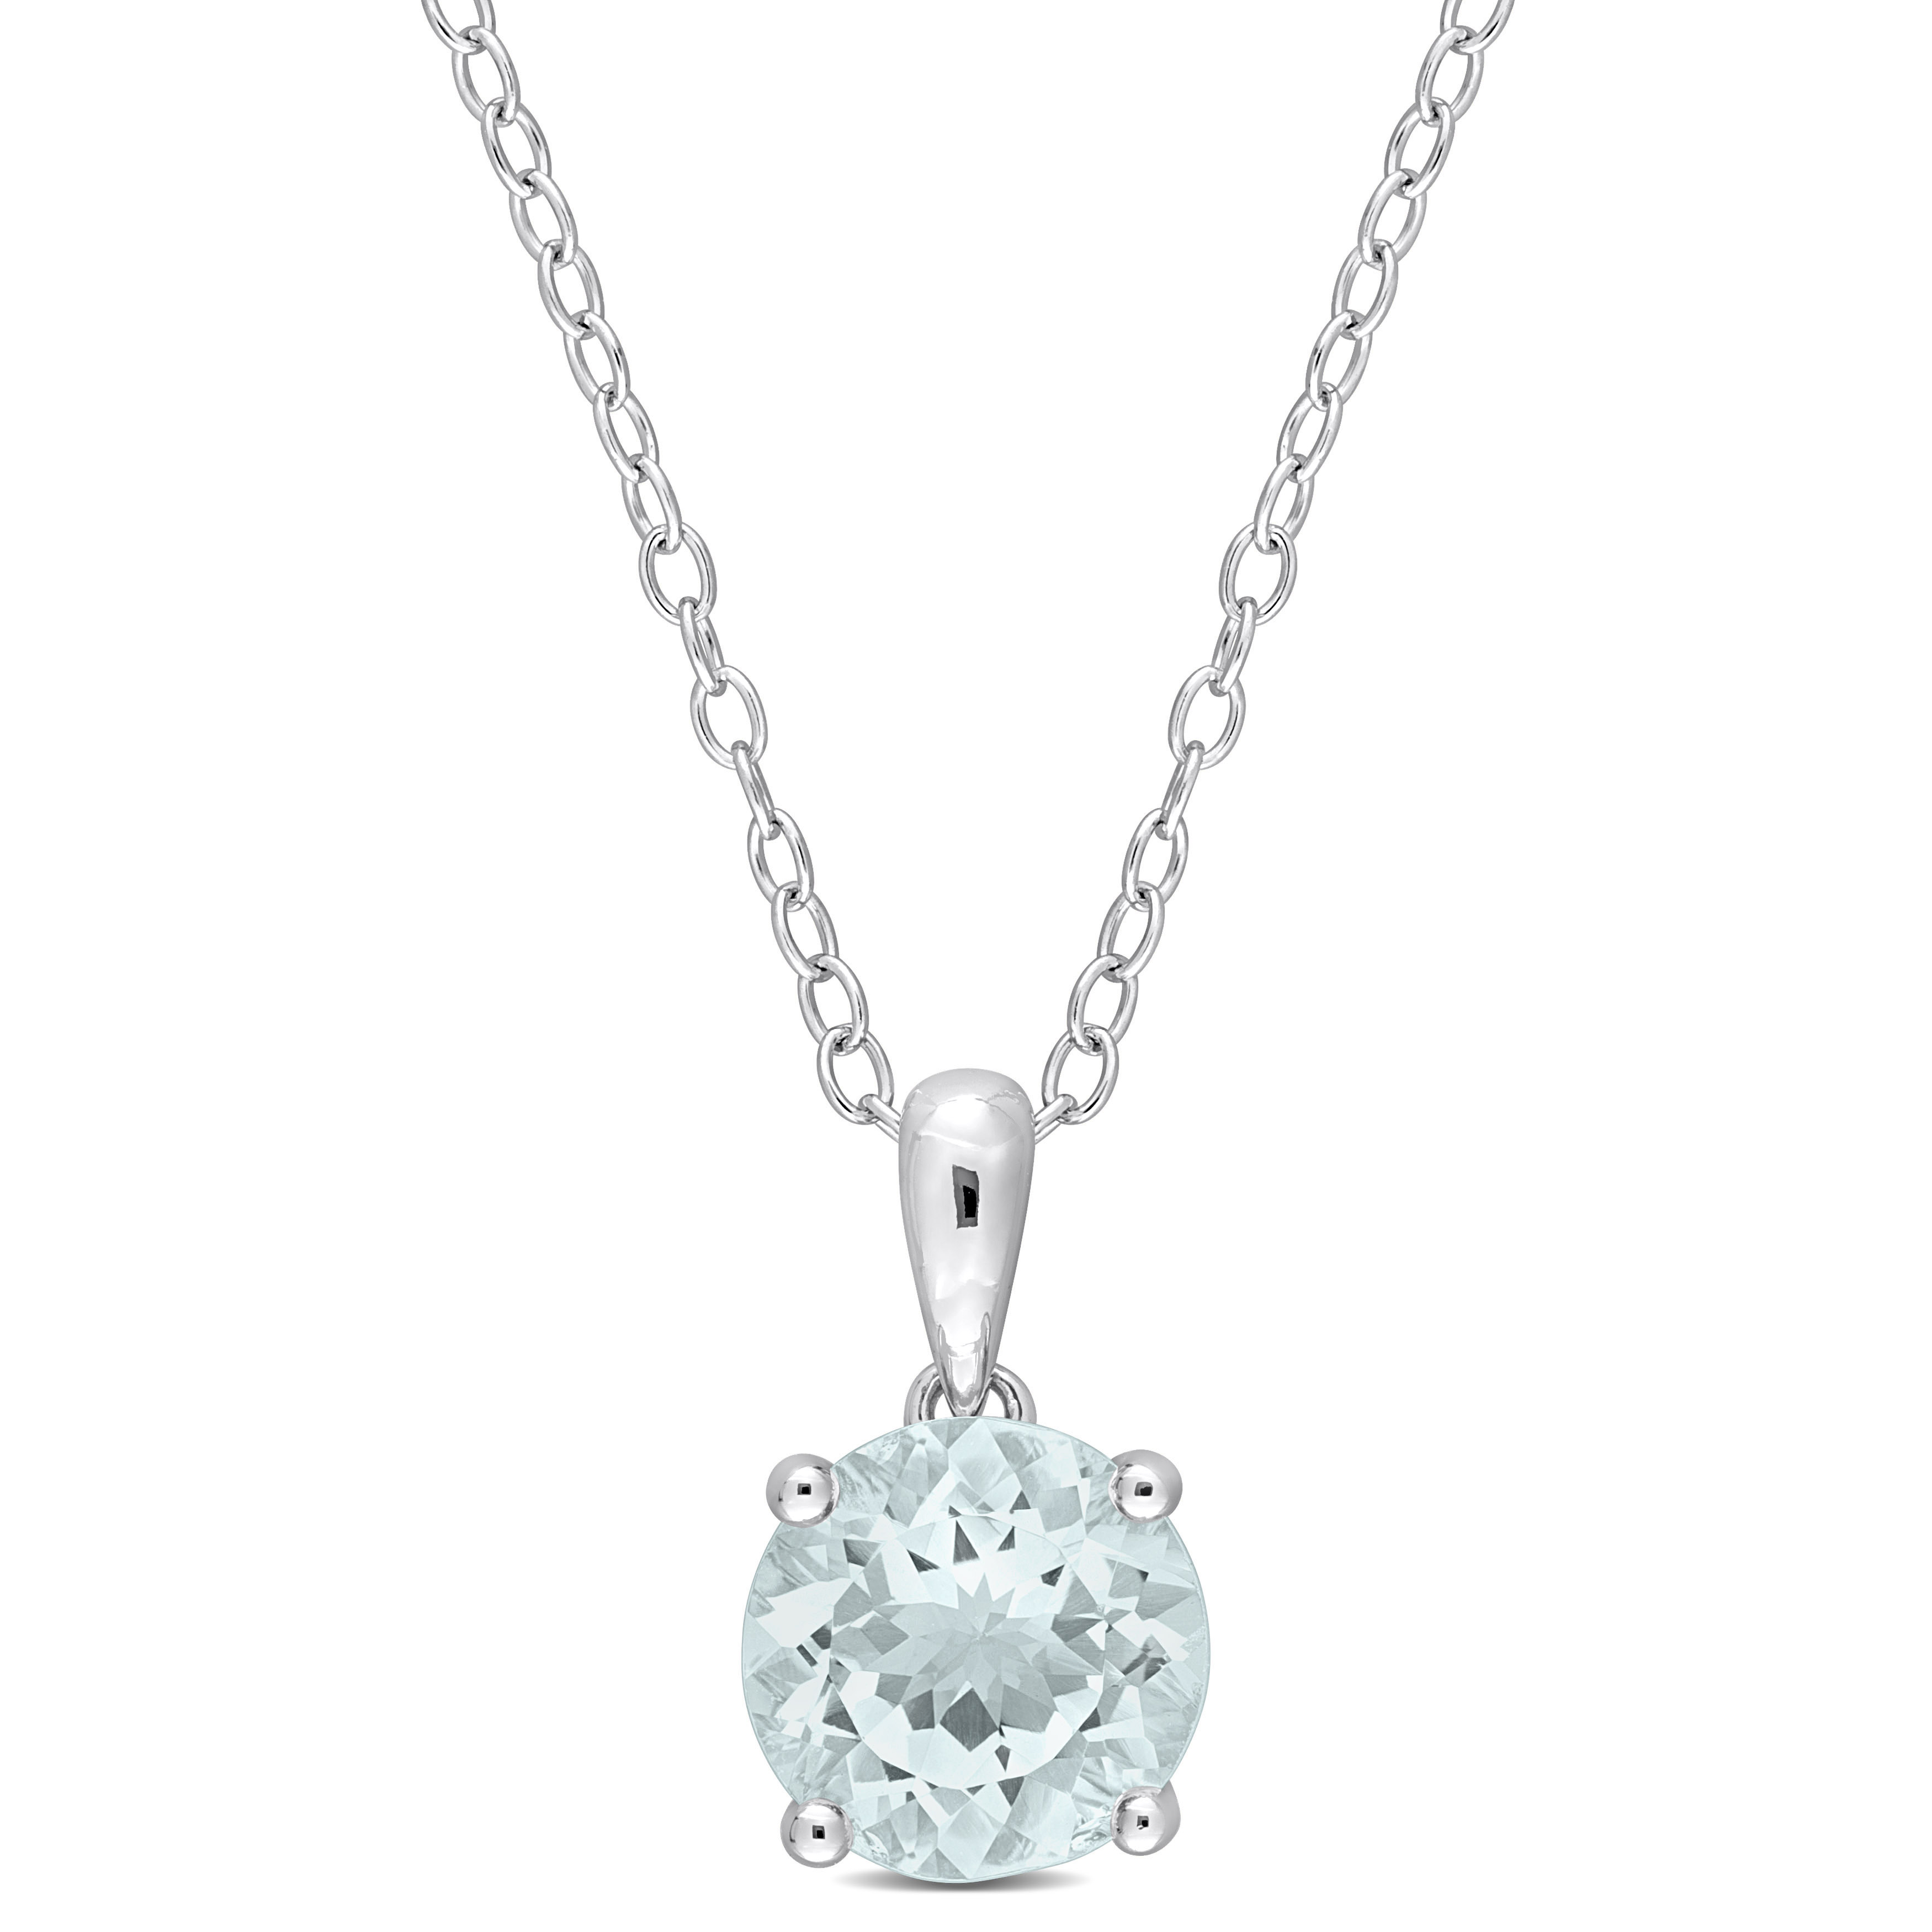 1 5/8 CT TGW Aquamarine Solitaire Heart Design Pendant with Chain in Sterling Silver - 18 in.